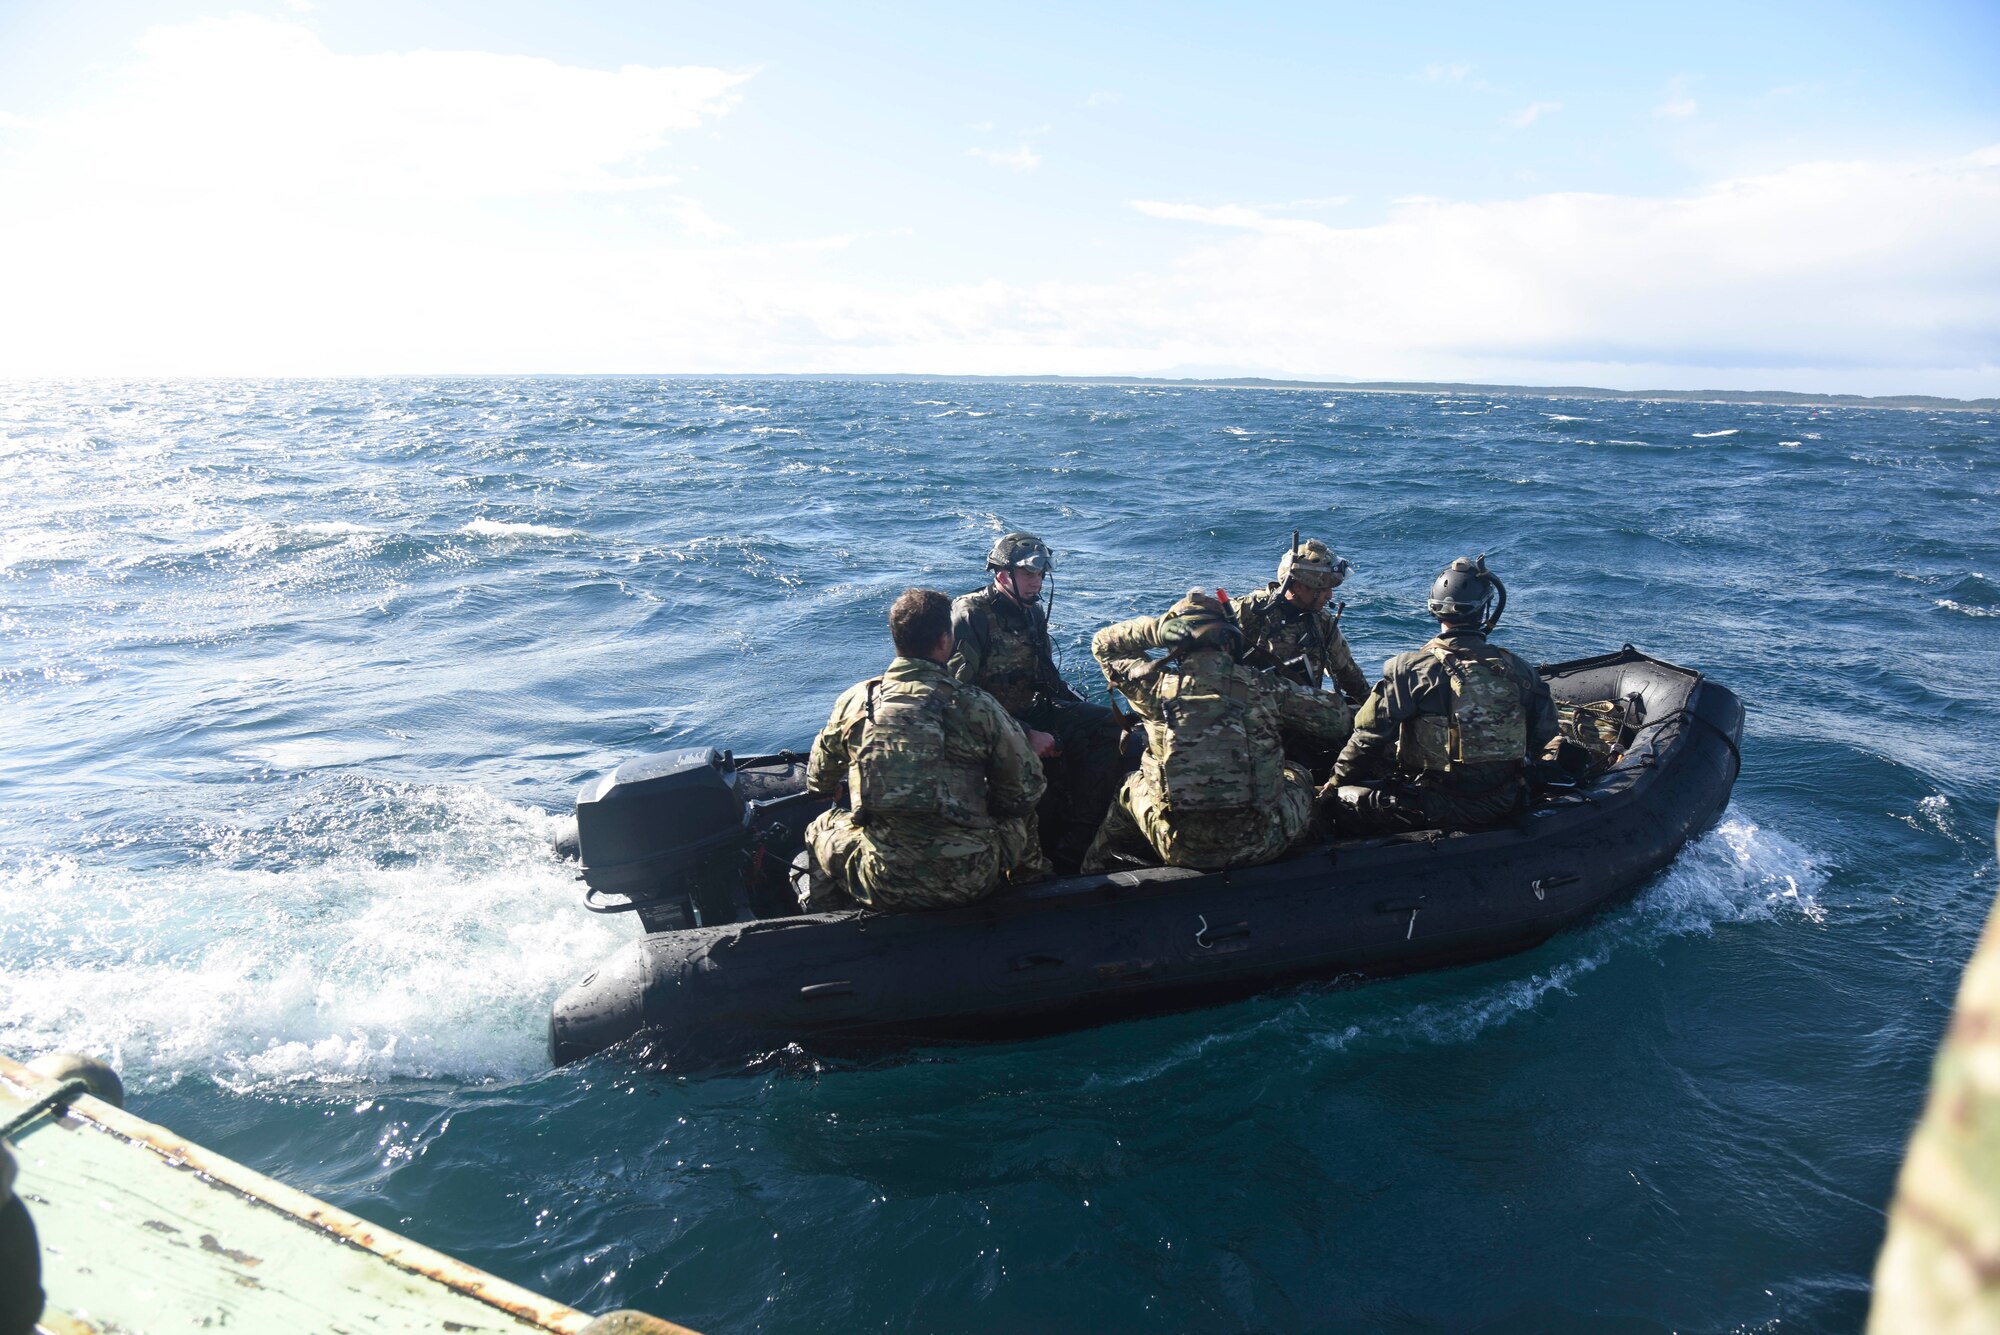 U.S. Air Force pararescue specialists with the 31st Rescue Squadron from Kadena Air Base, Japan, deploy a rescue boat for a combat search and rescue training mission during exercise Keen Sword 19, near Misawa Air Base, Japan, Oct. 19, 2018. Approximately 10,000 U.S. service members participated in KS19 from units including the U.S. Pacific Fleet, U.S. Forces Japan, 7th Fleet, 5th Air Force, 374th Airlift Wing, 18th Wing, 35th Fighter Wing and III Marine Expeditionary Force. Exercises like Keen Sword provide the Japan Self-Defense Force and U.S. military opportunities to train together across a variety of mission areas in realistic scenarios, enhancing readiness and interoperability. (U.S. Air Force photo by Senior Airman Sadie Colbert)